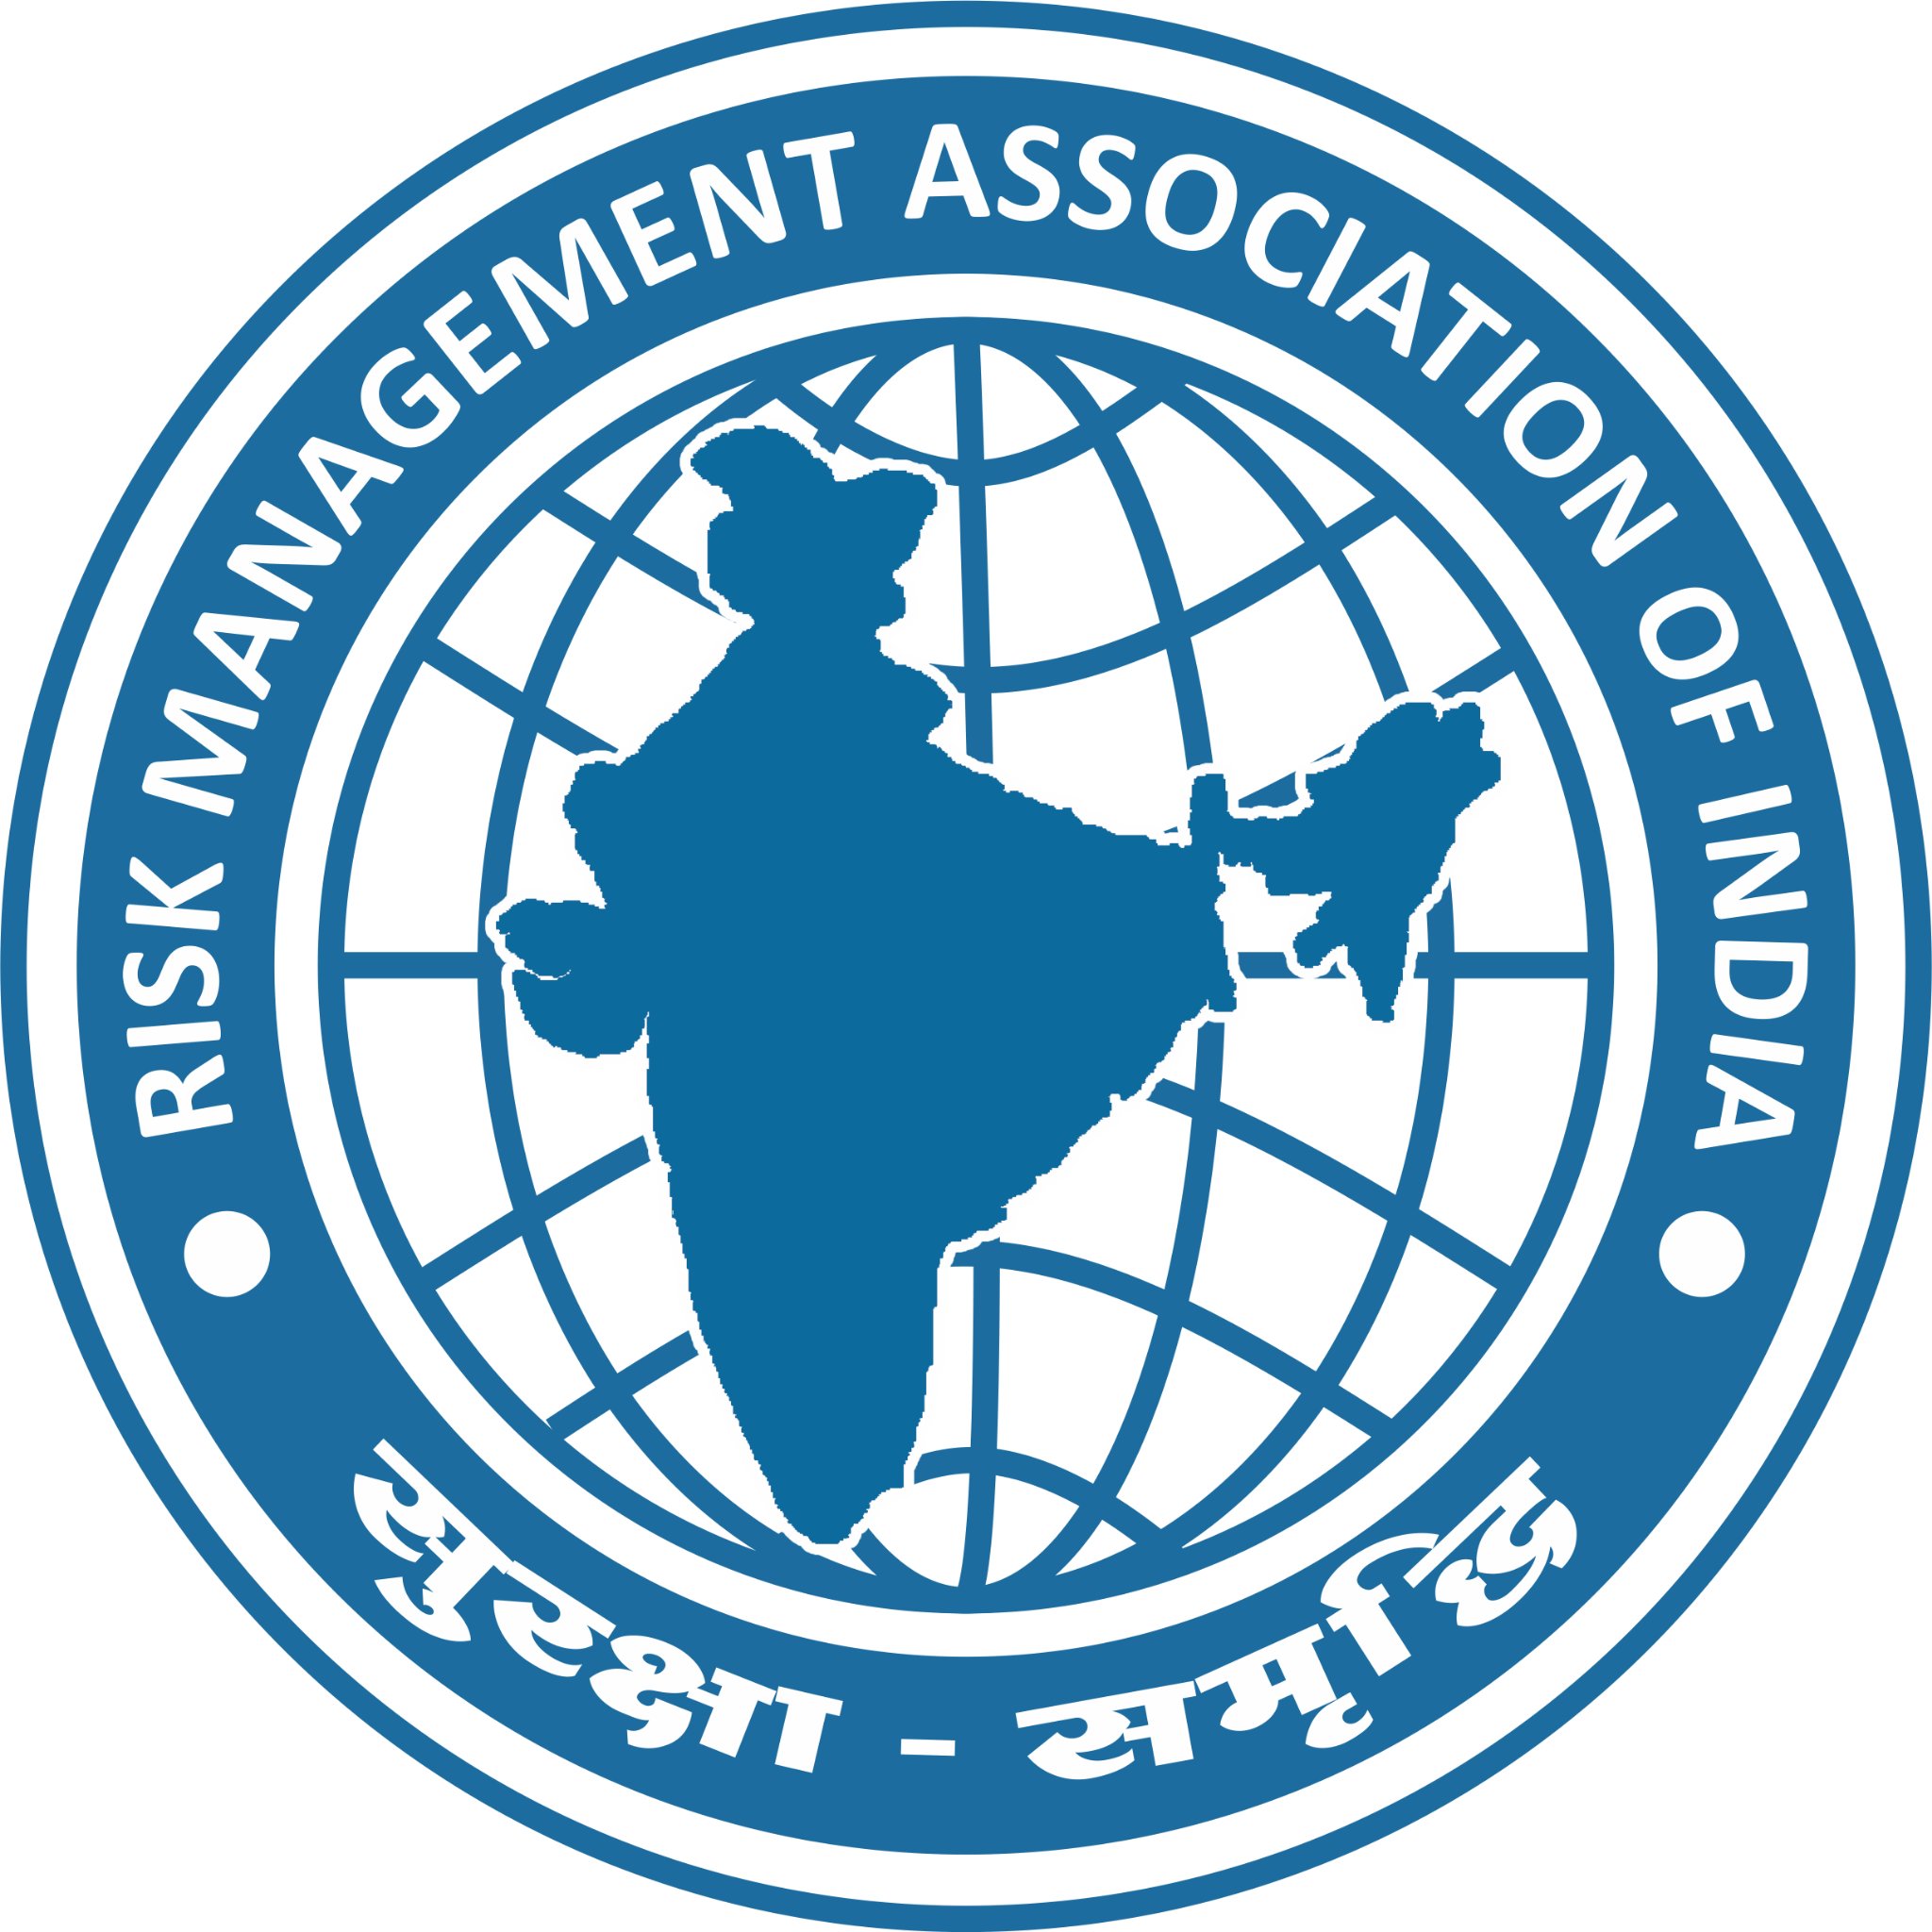 The Risk Management Association of India is an NGO which is working in the area of promoting the concept of Risk management in India